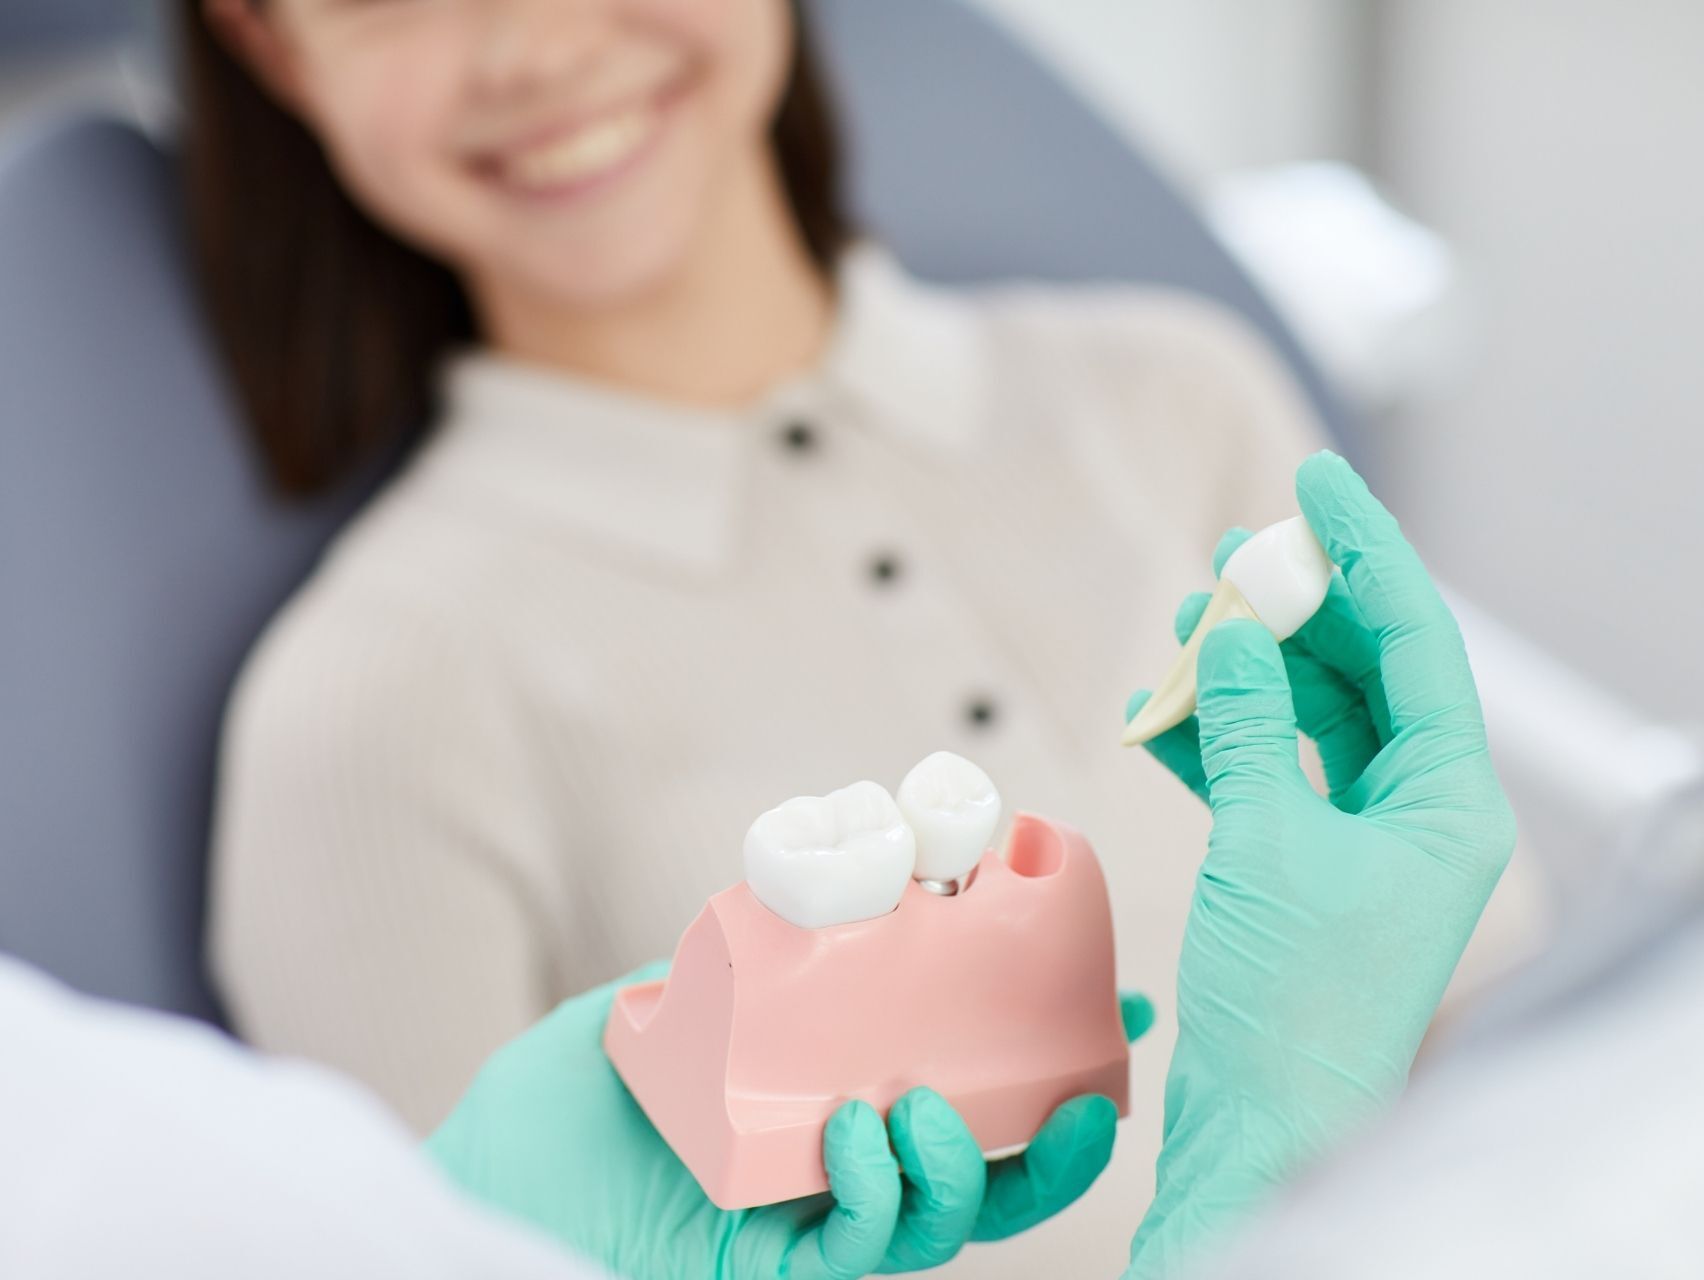 Tooth extraction Knox county dental